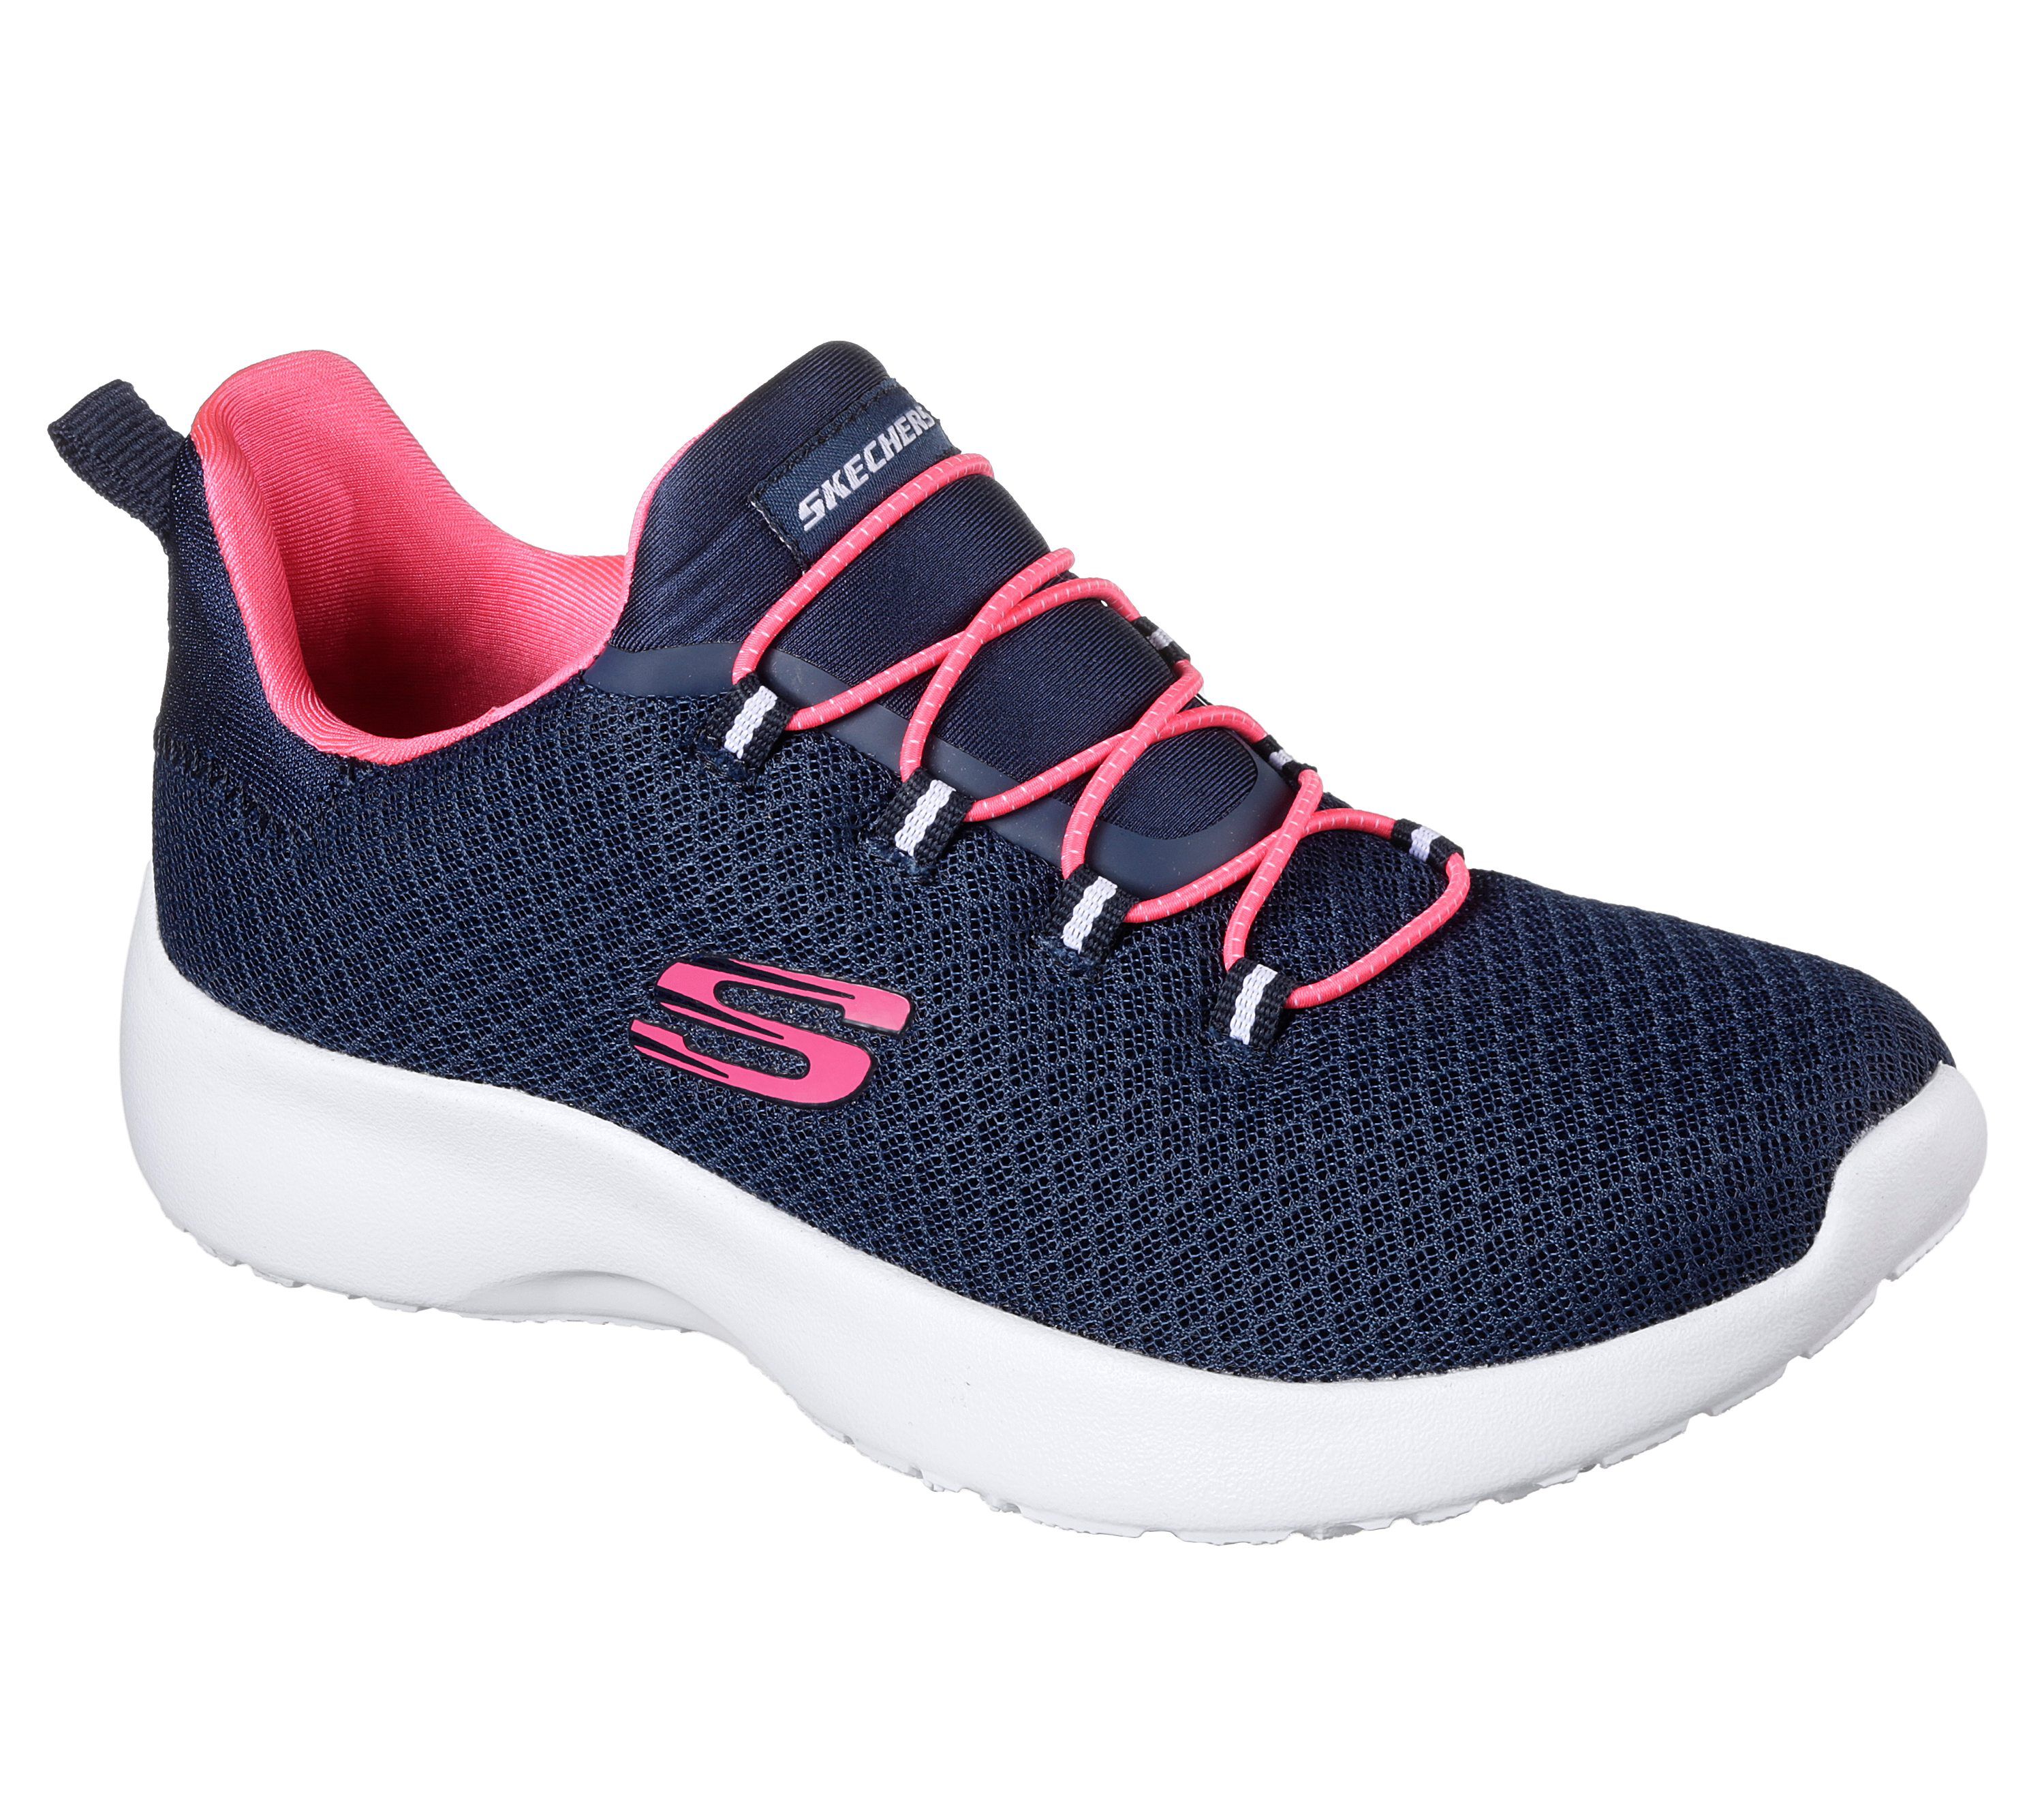 Shop the Dynamight | SKECHERS